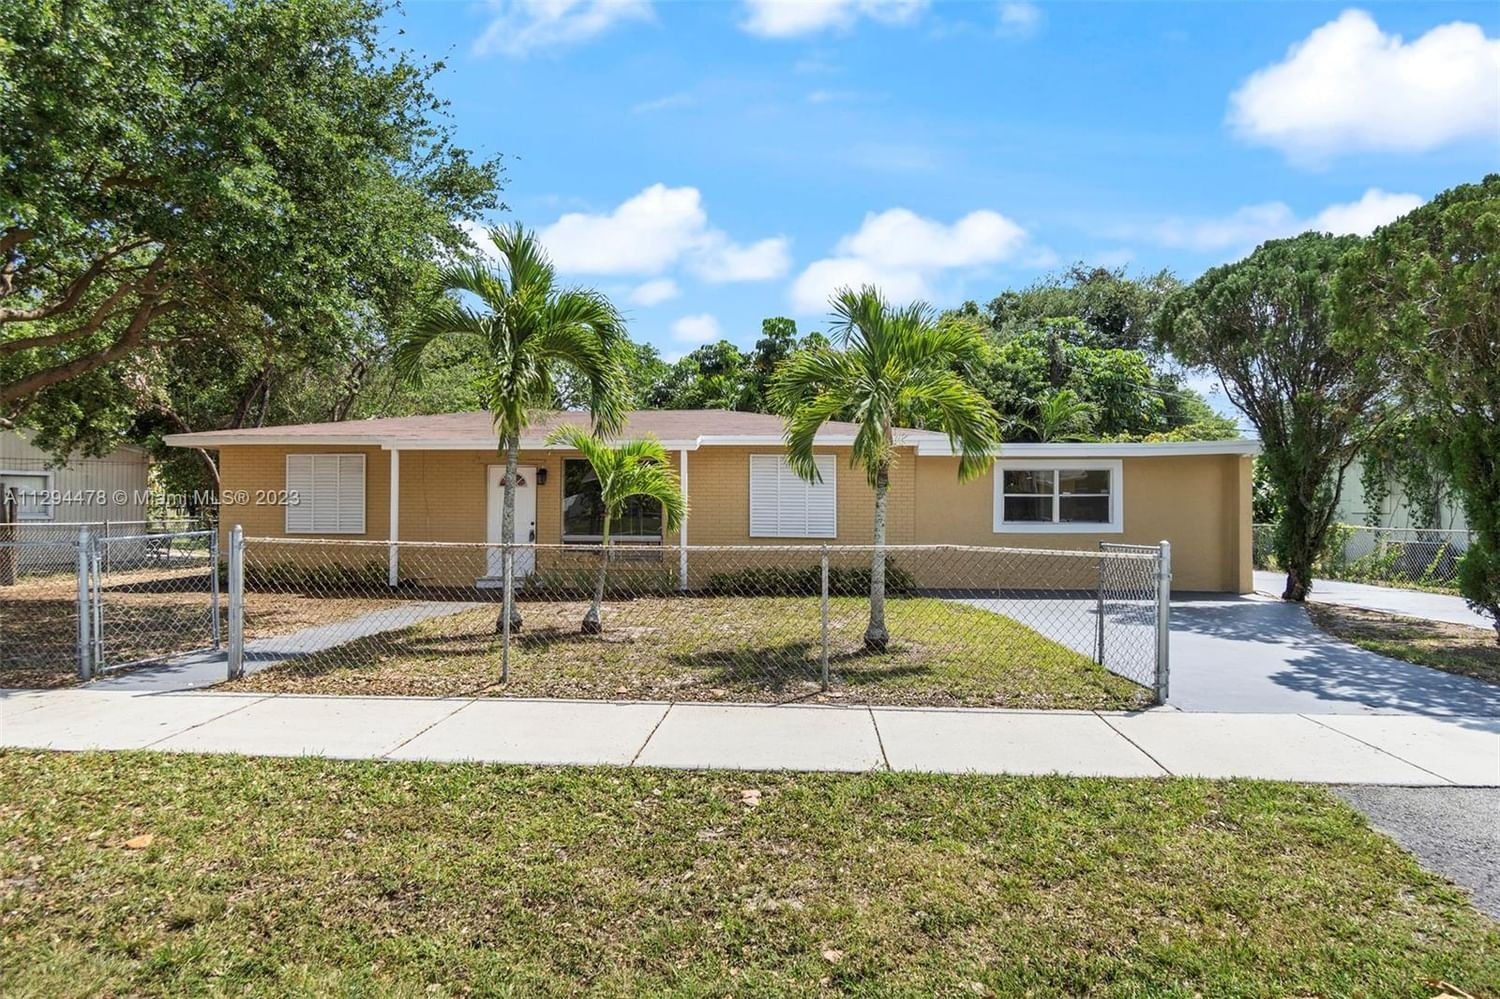 Real estate property located at 3310 36th St, Broward County, West Park, FL